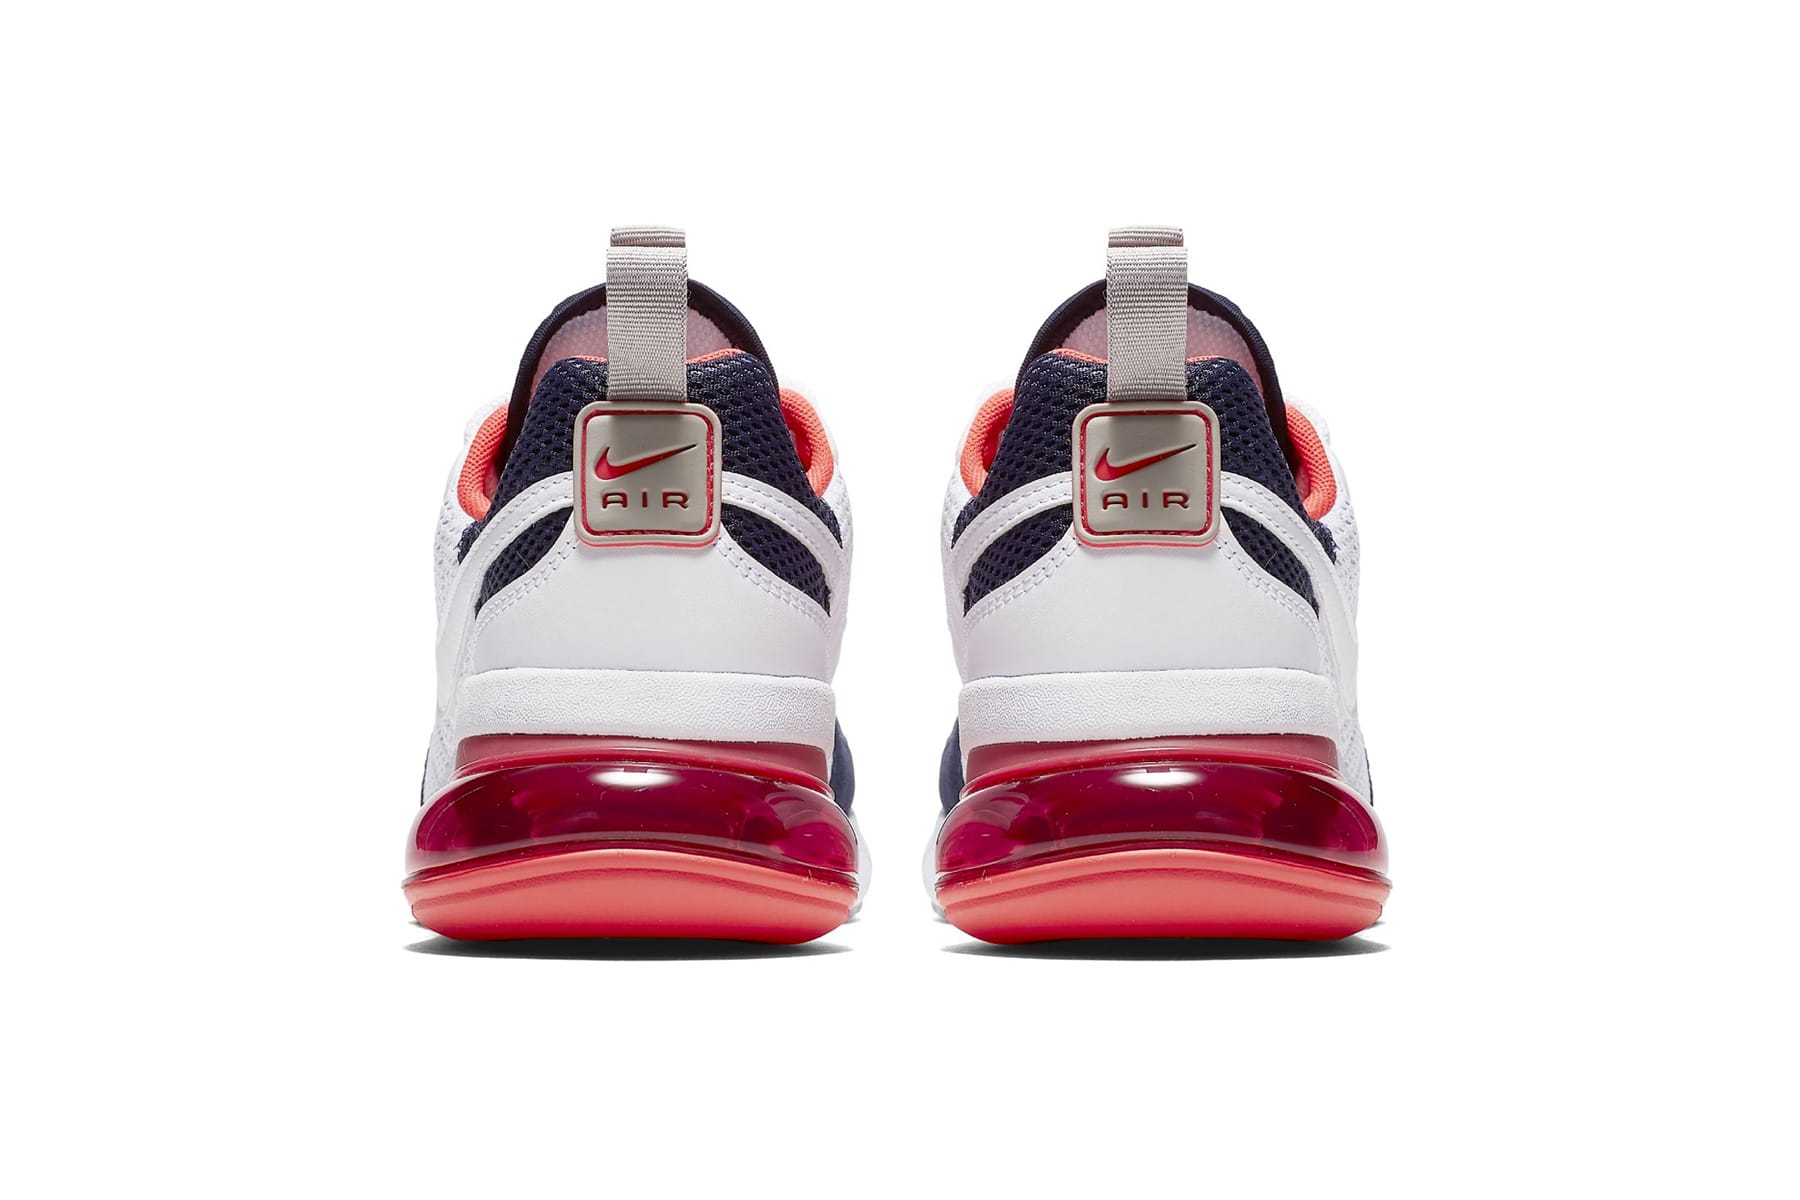 nike air 270 red white and blue